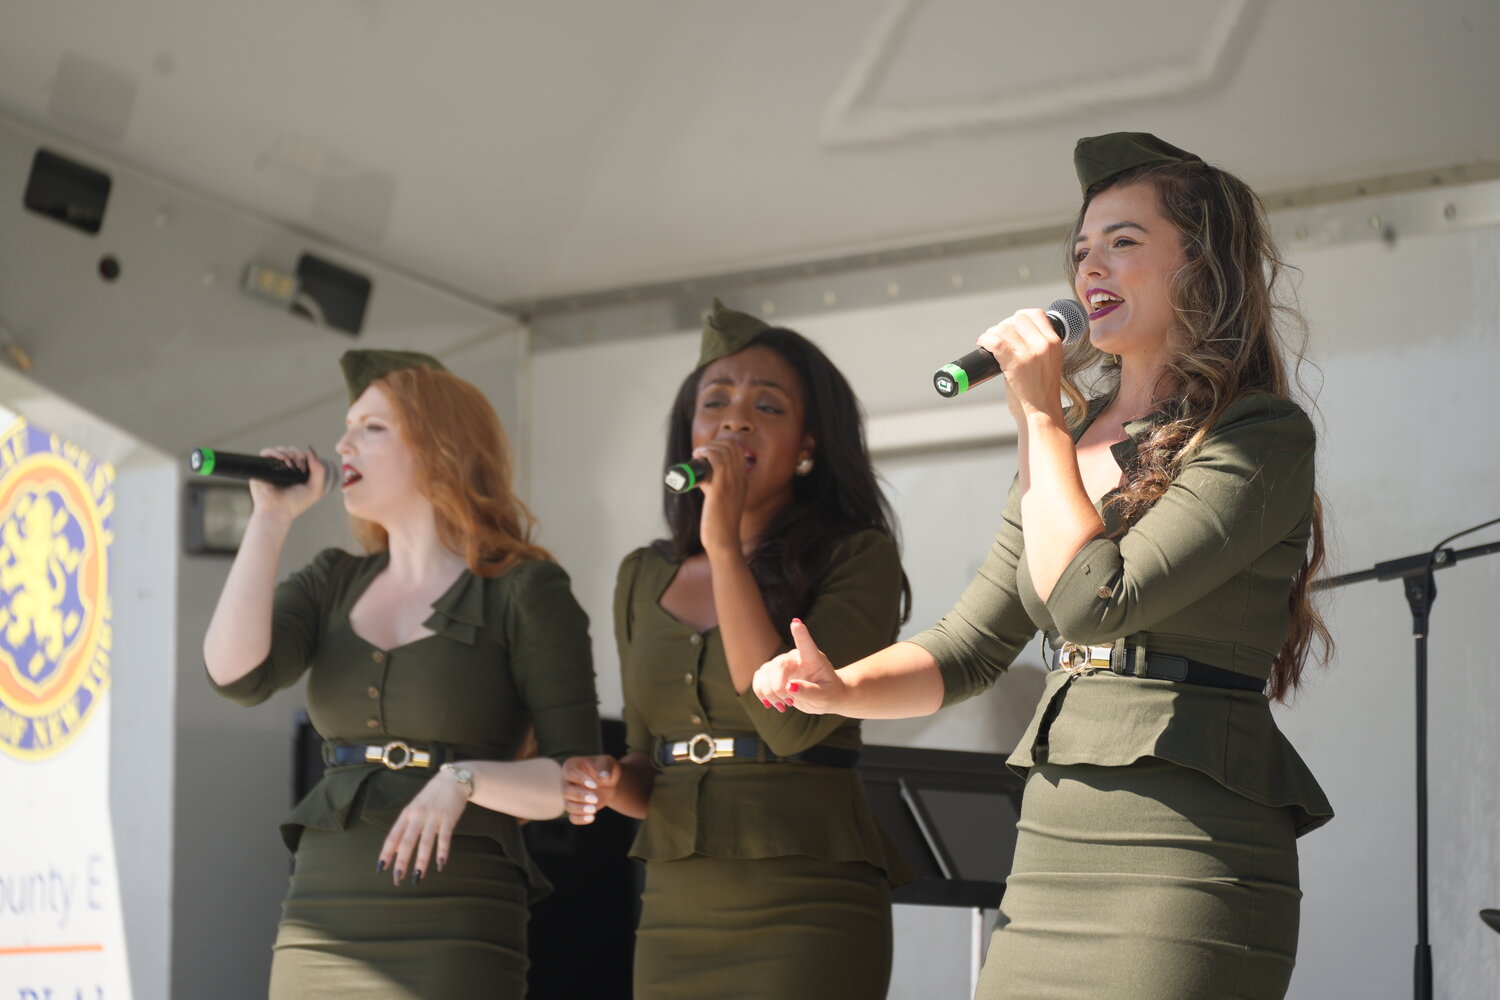 The American Bombshells presented a patriotic performance for fair attendees.